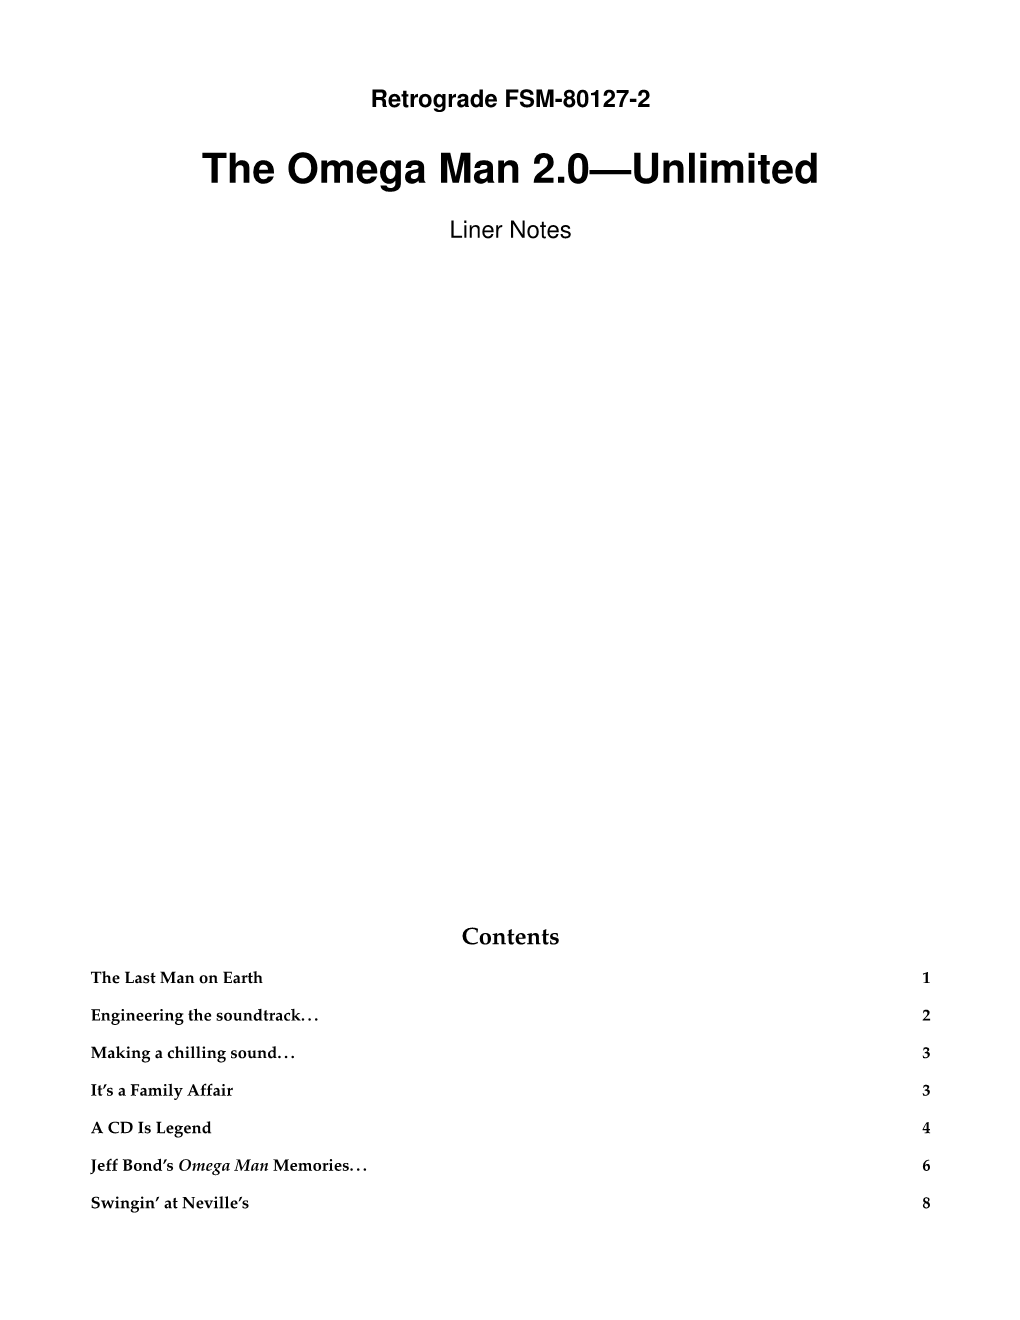 The Omega Man 2.0—Unlimited